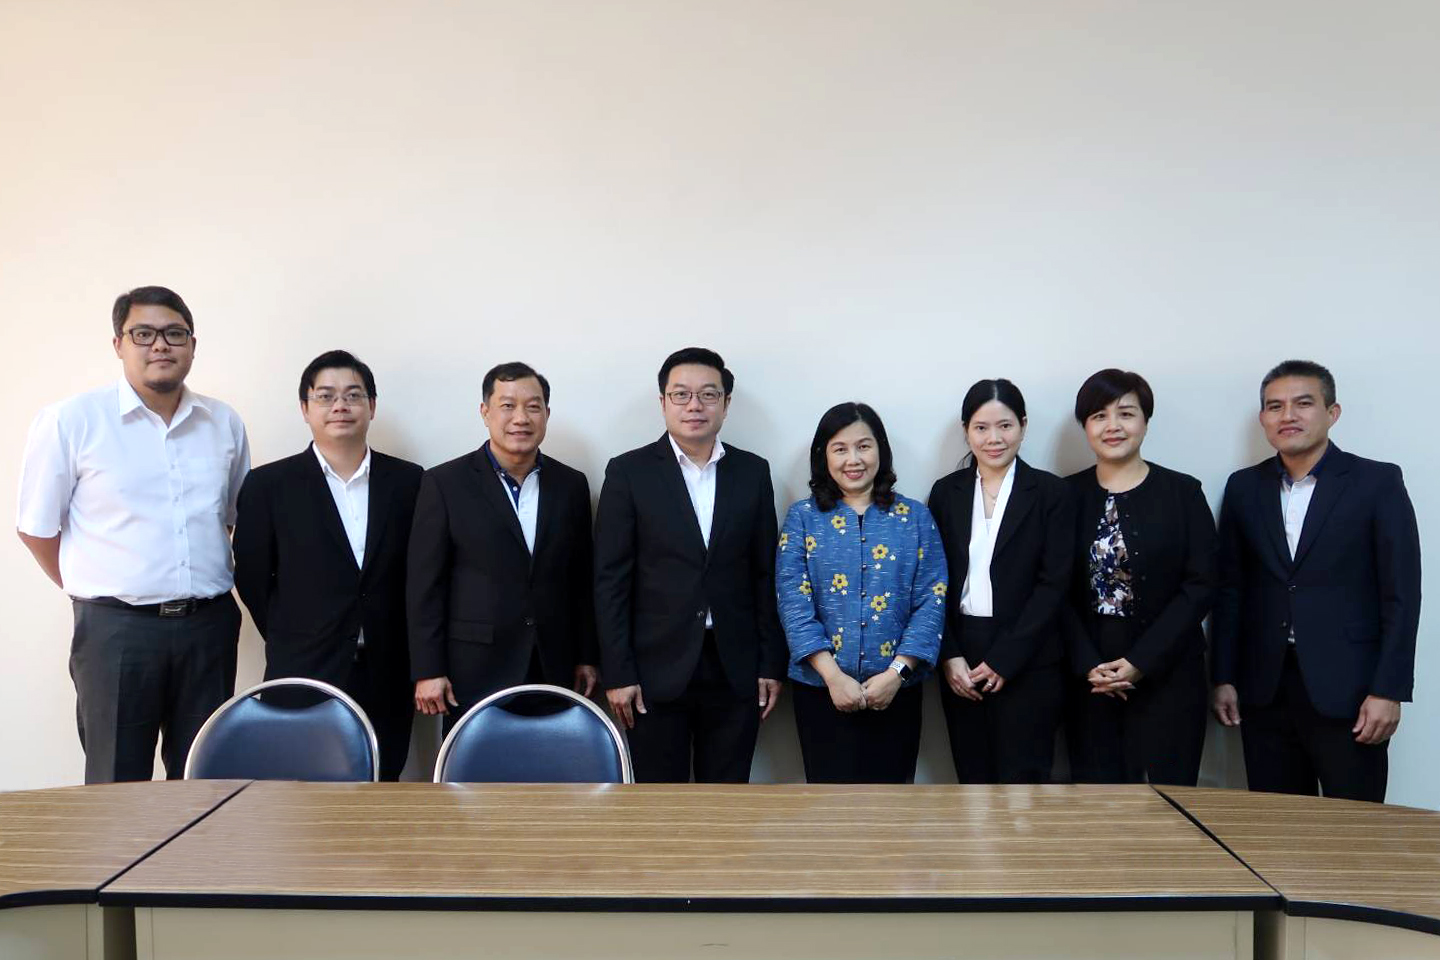 EXIM Thailand Paid a Courtesy Visit to Lao PDR’s Director General of Department of External Finance and Debt Management to Promote Thai Entrepreneur’s Trade and Investment